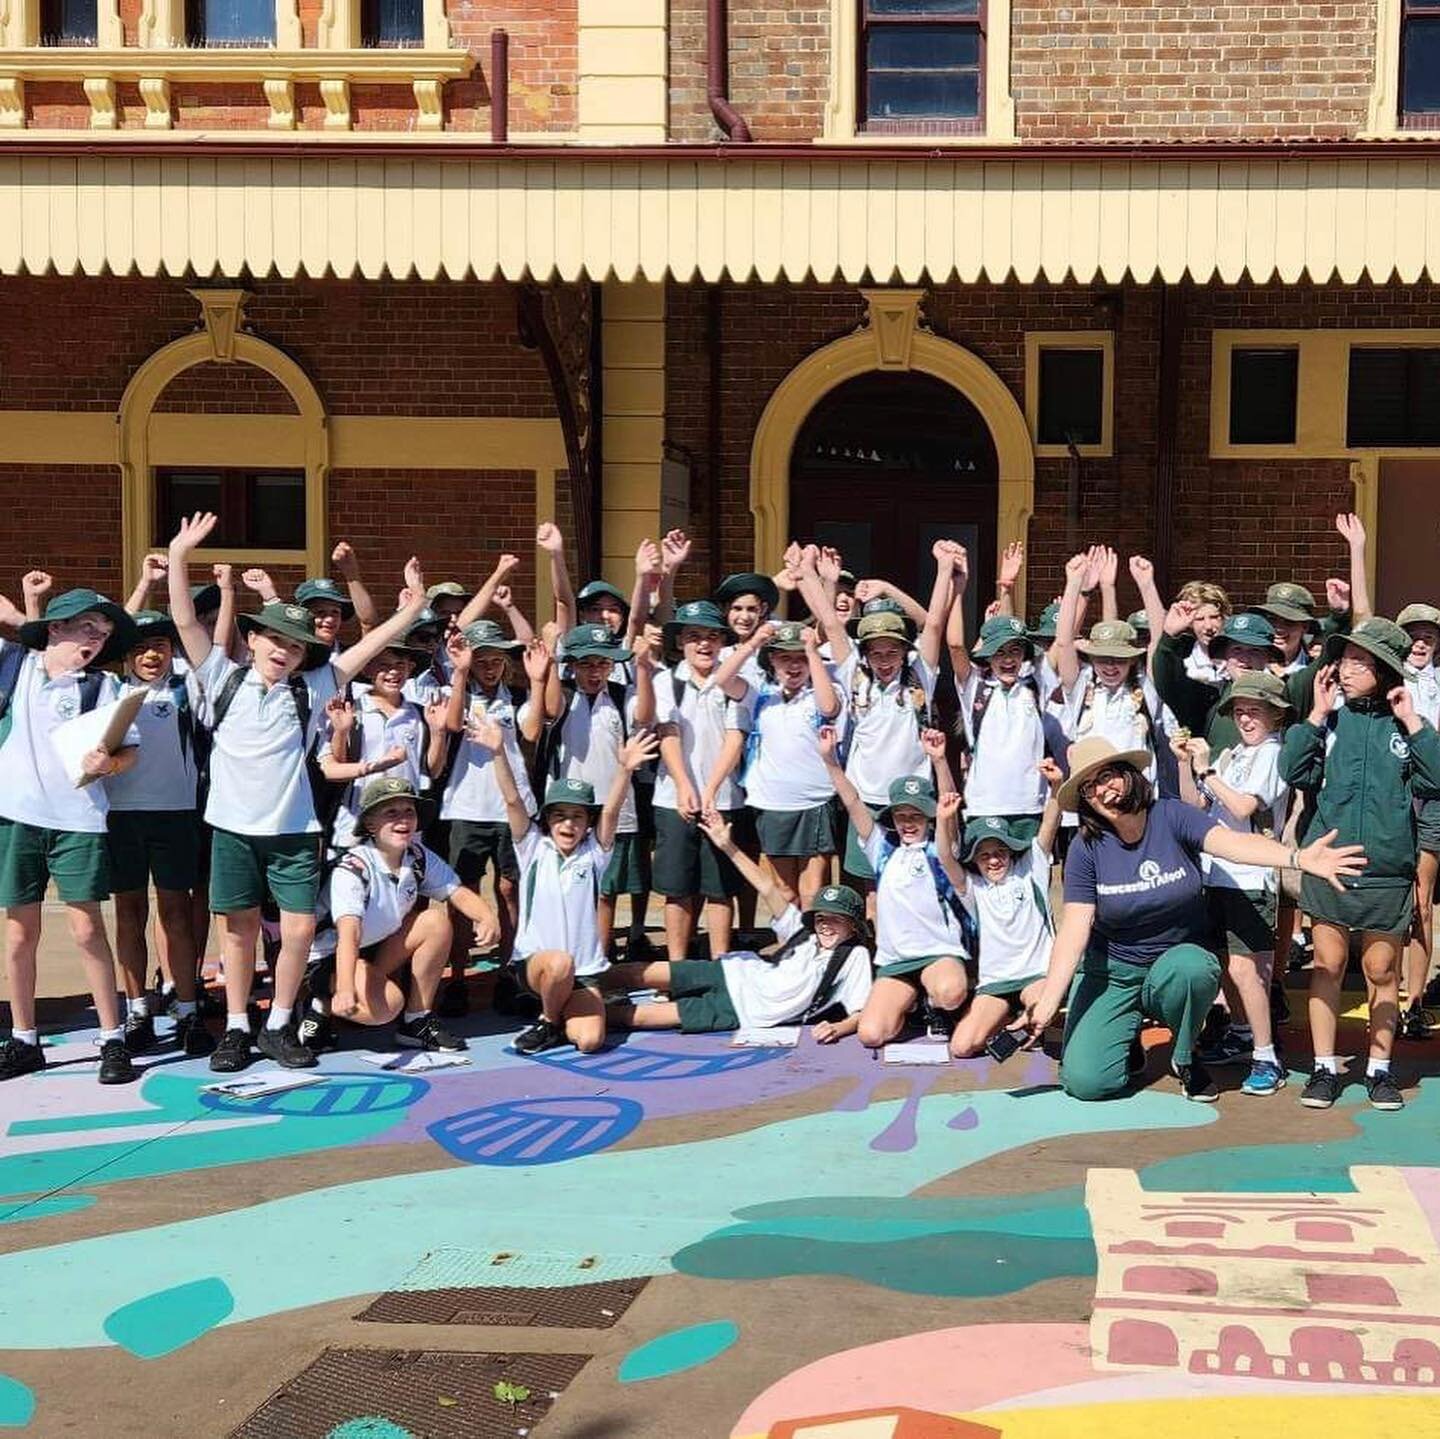 What a day with this Year 5 and 6 crew today on our &lsquo;Rough to Ready&rsquo; History and Geography excursion. We added some bonus street art at the school&rsquo;s request and it went down a treat. 👟🎒🔍🚂🗺

Thanks to Hunter and Central Coast De